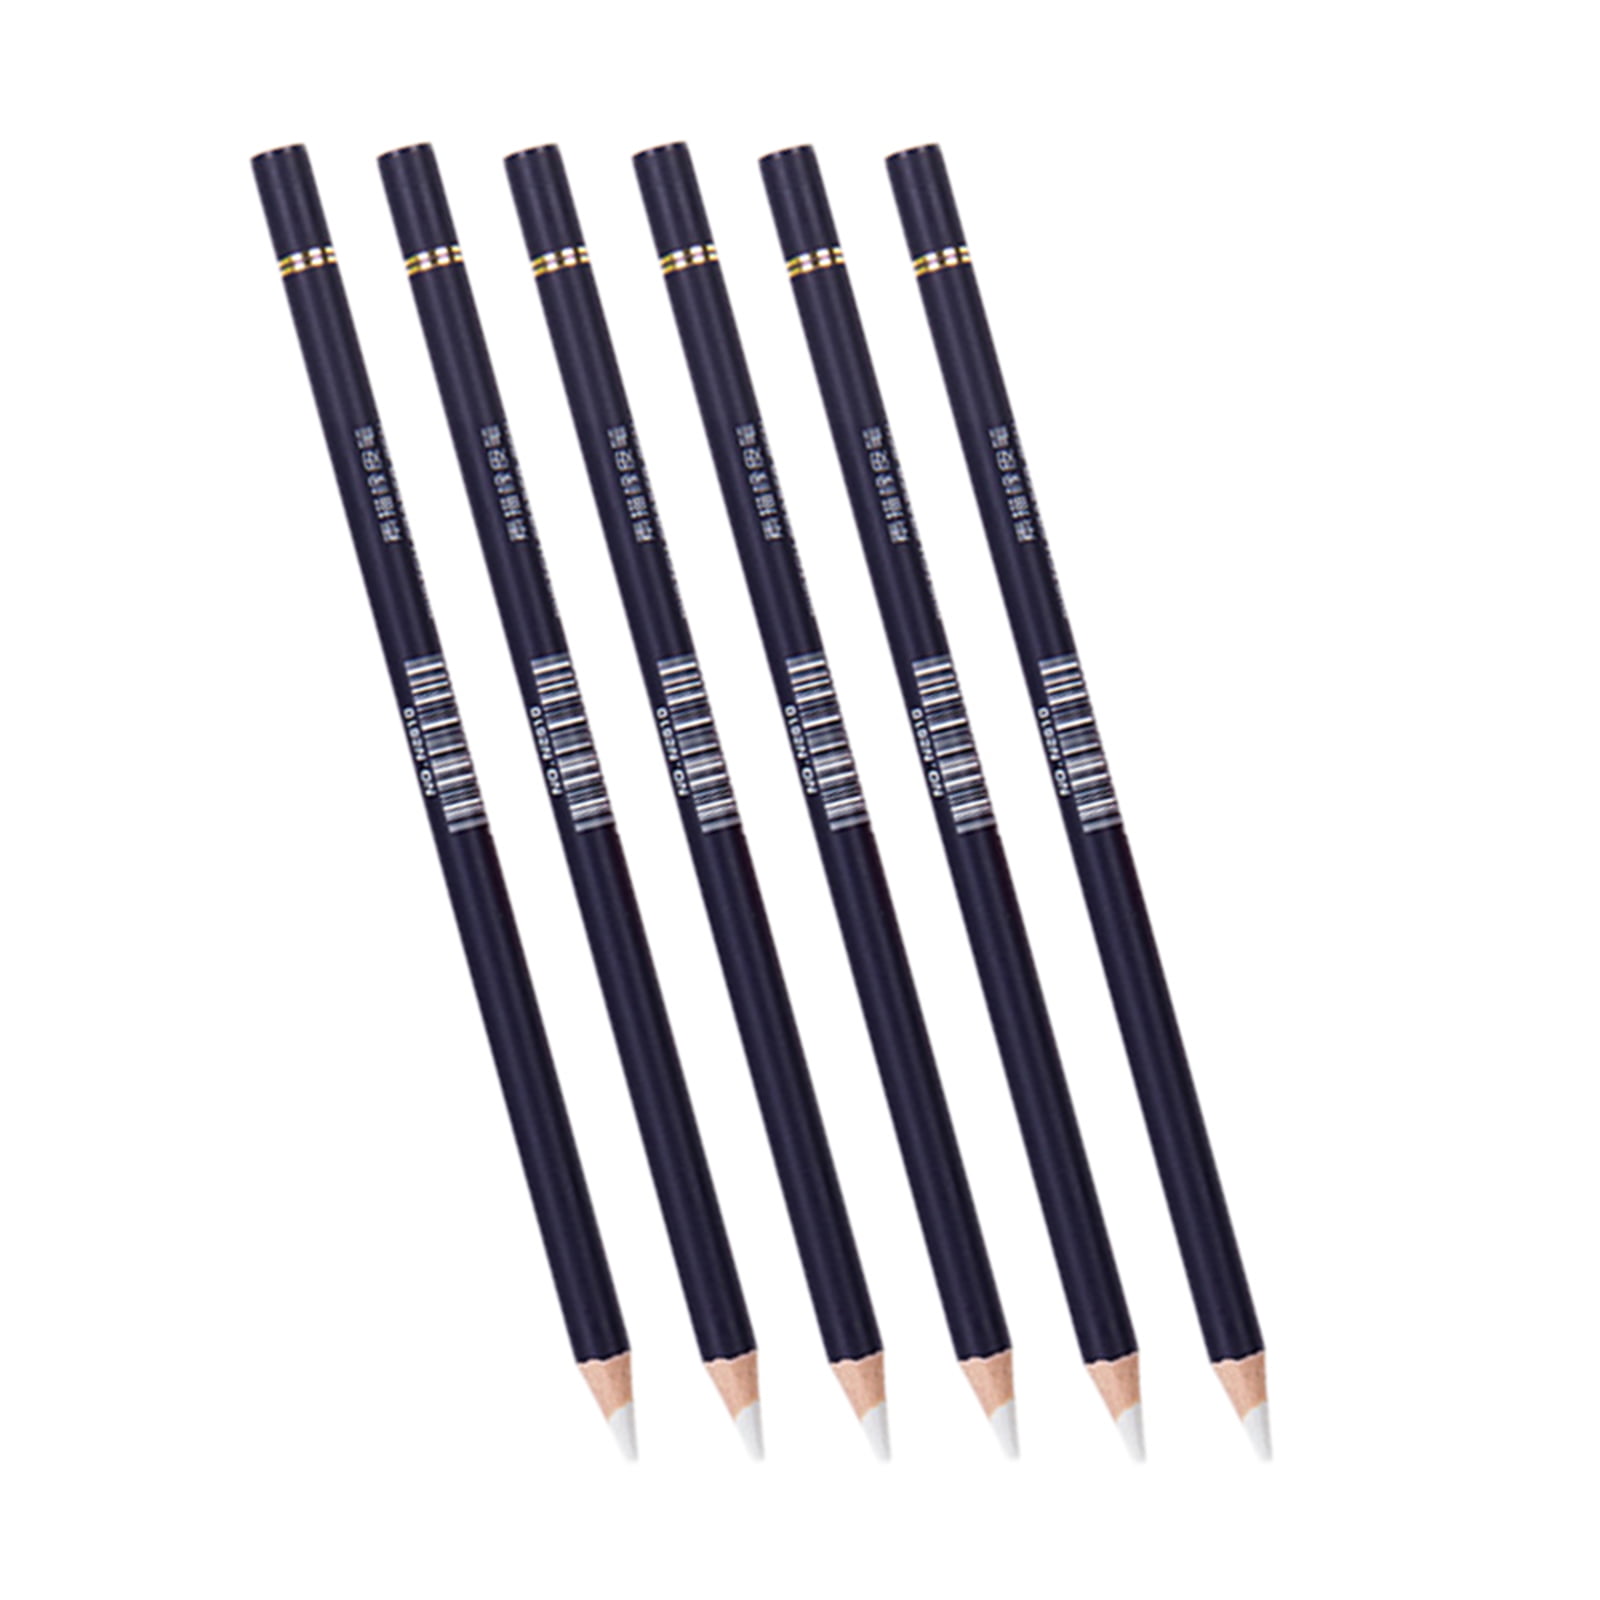 Pencil Eraser in Pen Shaped Barrell Rubber for Artists School Office Student 